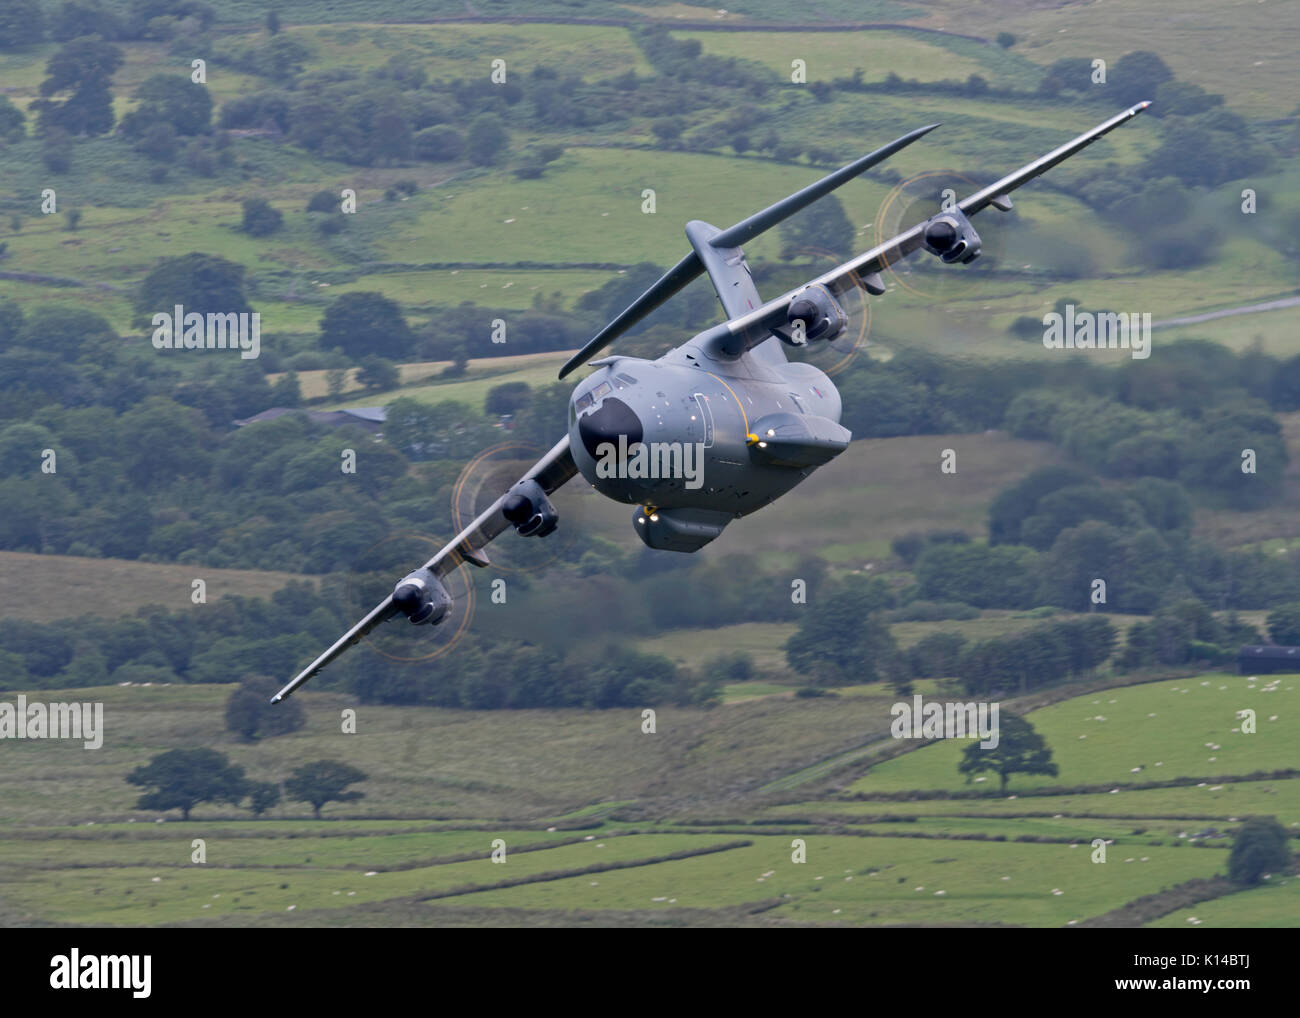 RAF Atlas A400M on a low level training flight in the Mach Loop area of Snowdonia Wales. Stock Photo